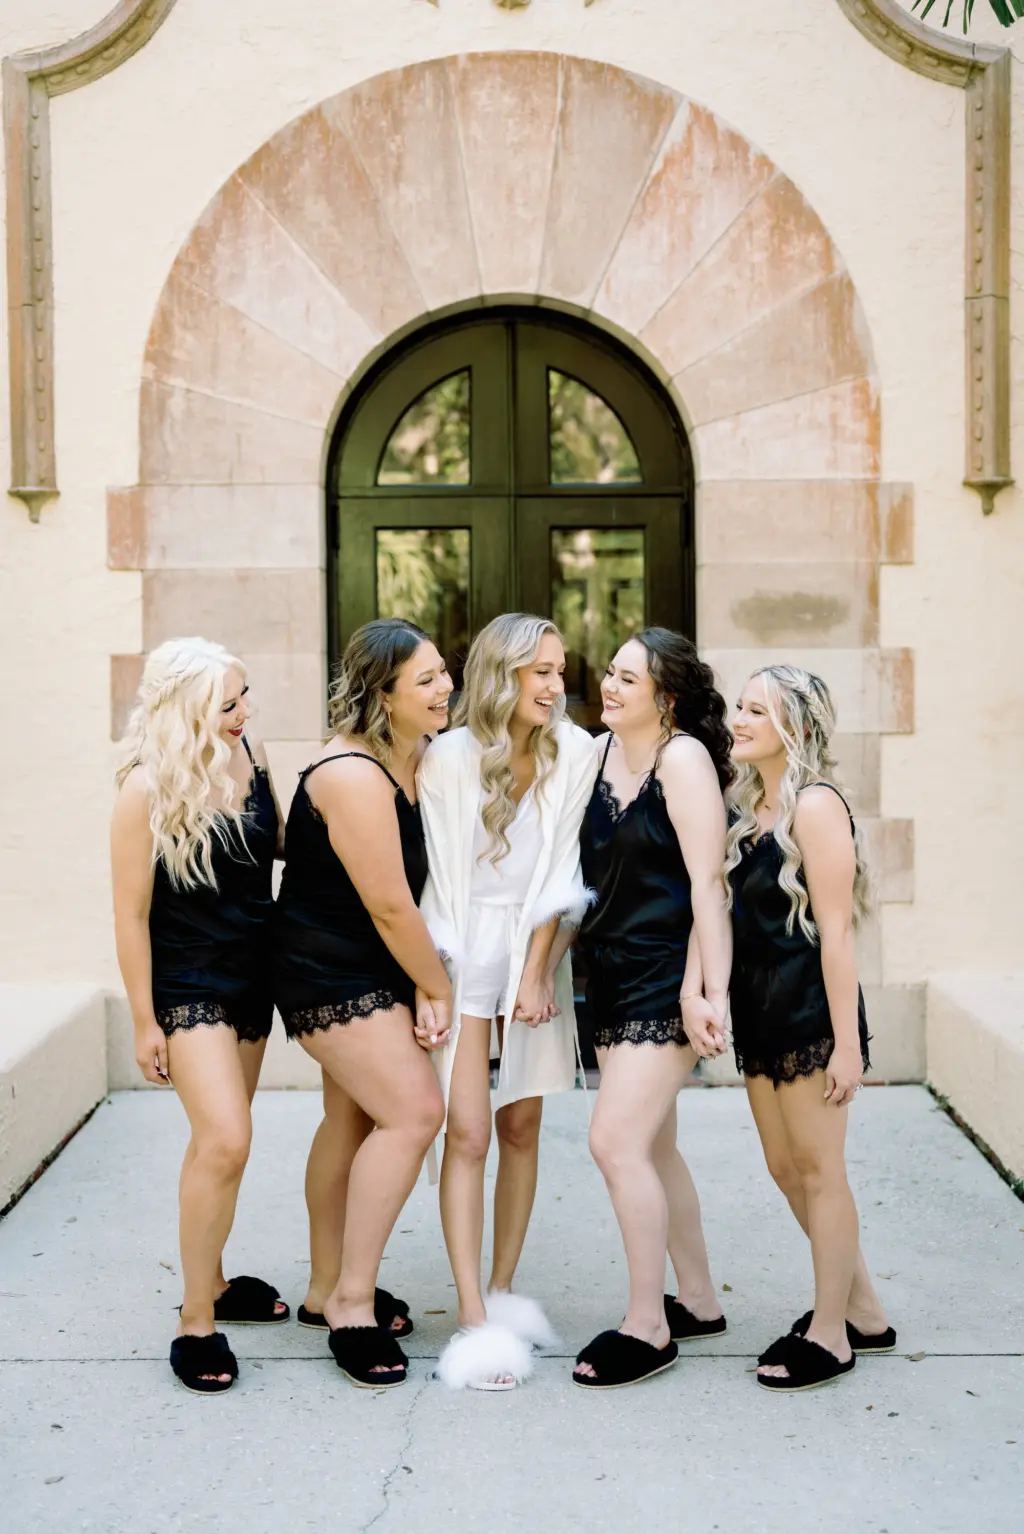 Bride and Bridesmaids Getting Ready Wedding Portrait | Black Lace and Satin Pajama Ideas